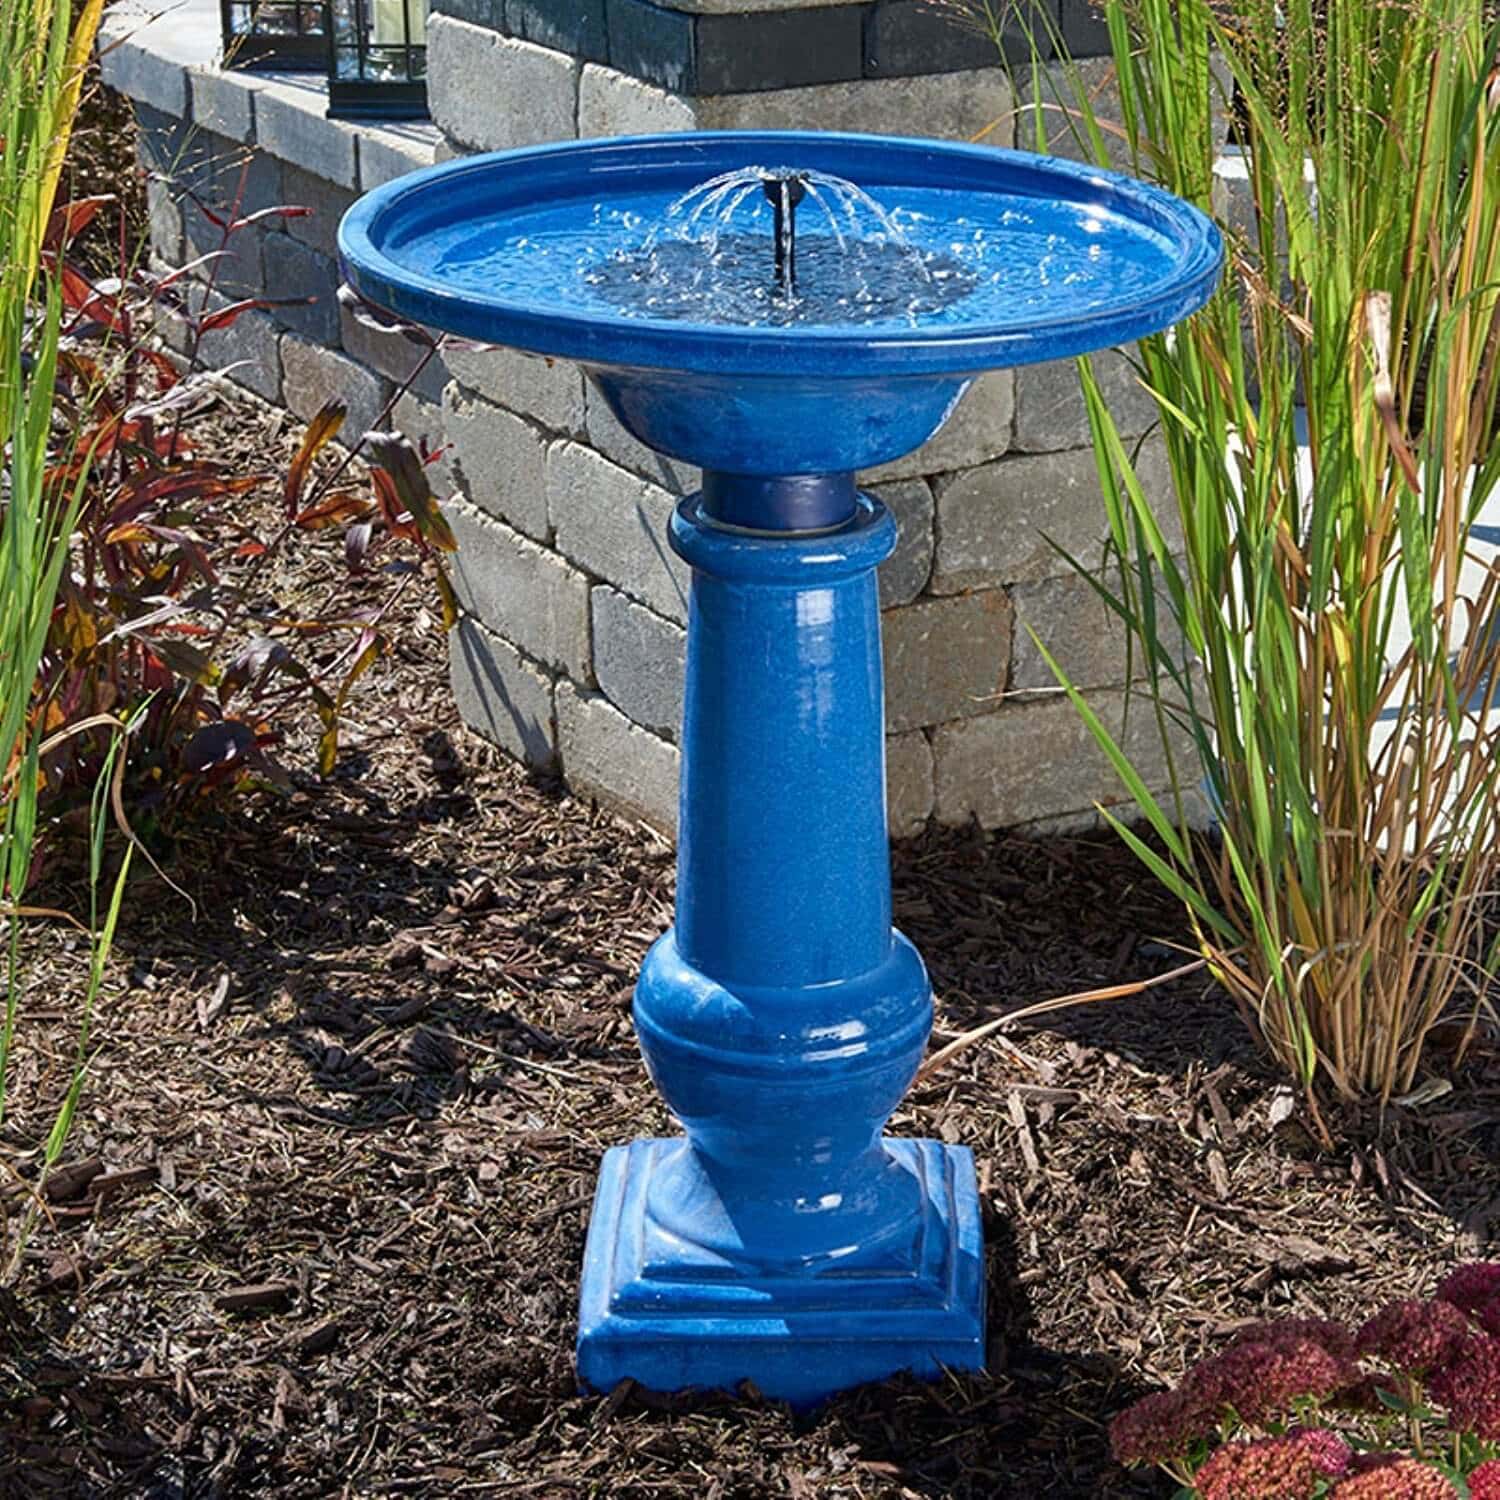 Download Birdbaths and Fountains - Advantages and Disadvantages